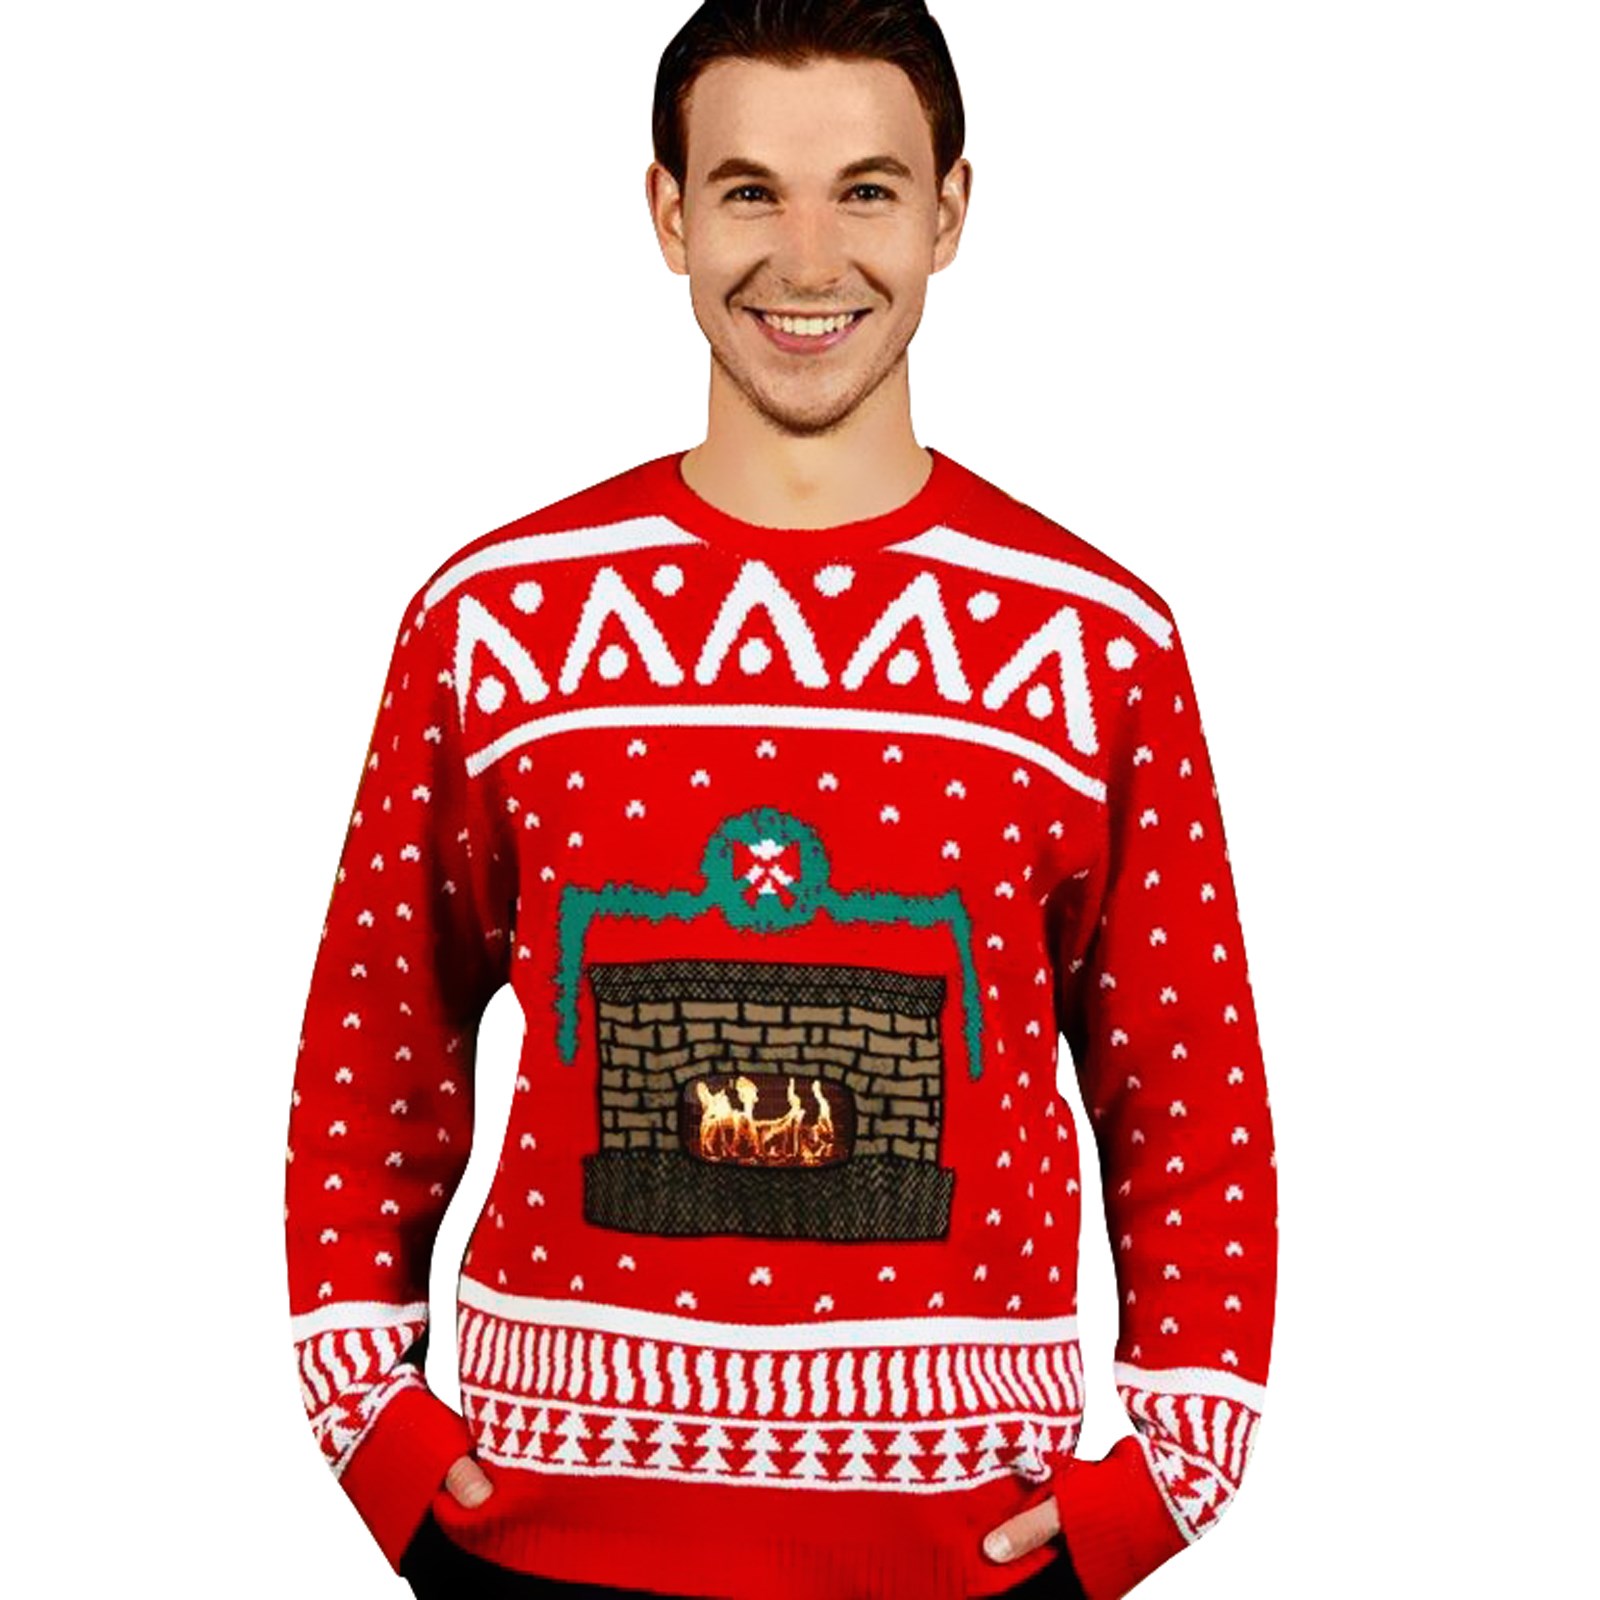 knit-crackling-fireplace-ugly-christmas-sweater-adult-bc-806027.jpg?is=800%2C800%2C0xffffff